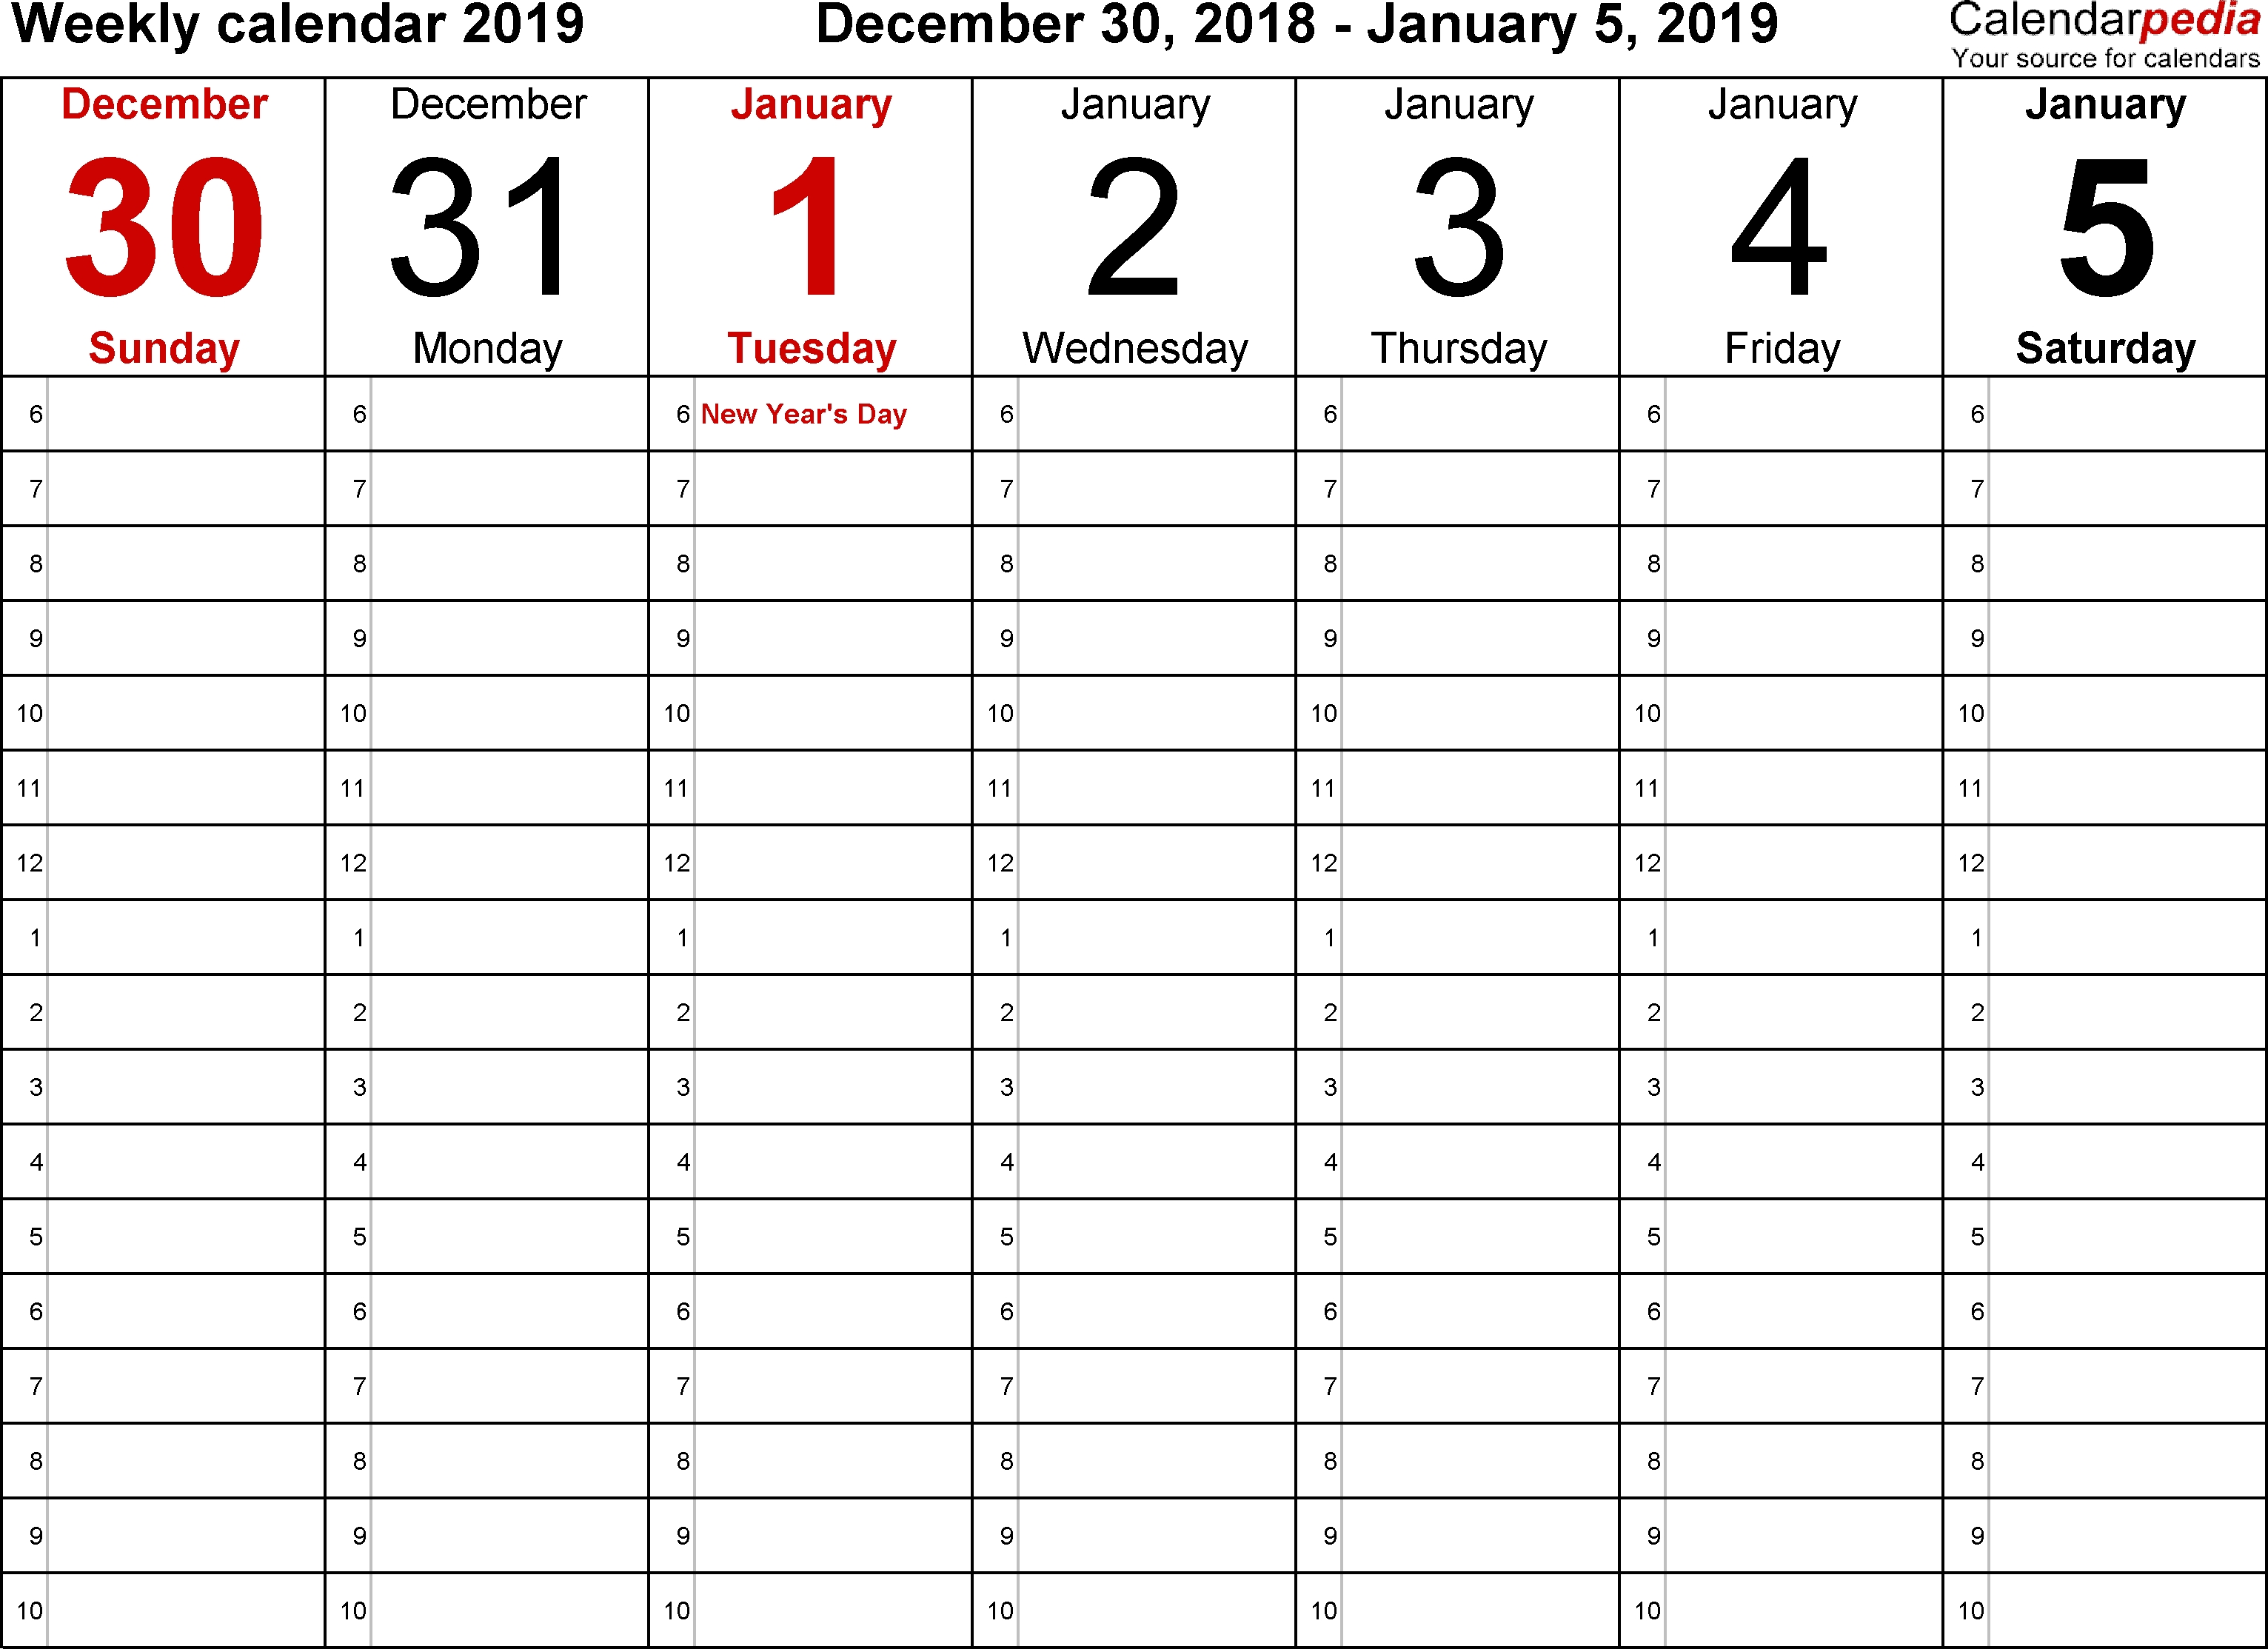 Blank Calendar With Times Weekly Es Free Printable Time Slots Daily regarding Blank Calendars To Print With Time Slots